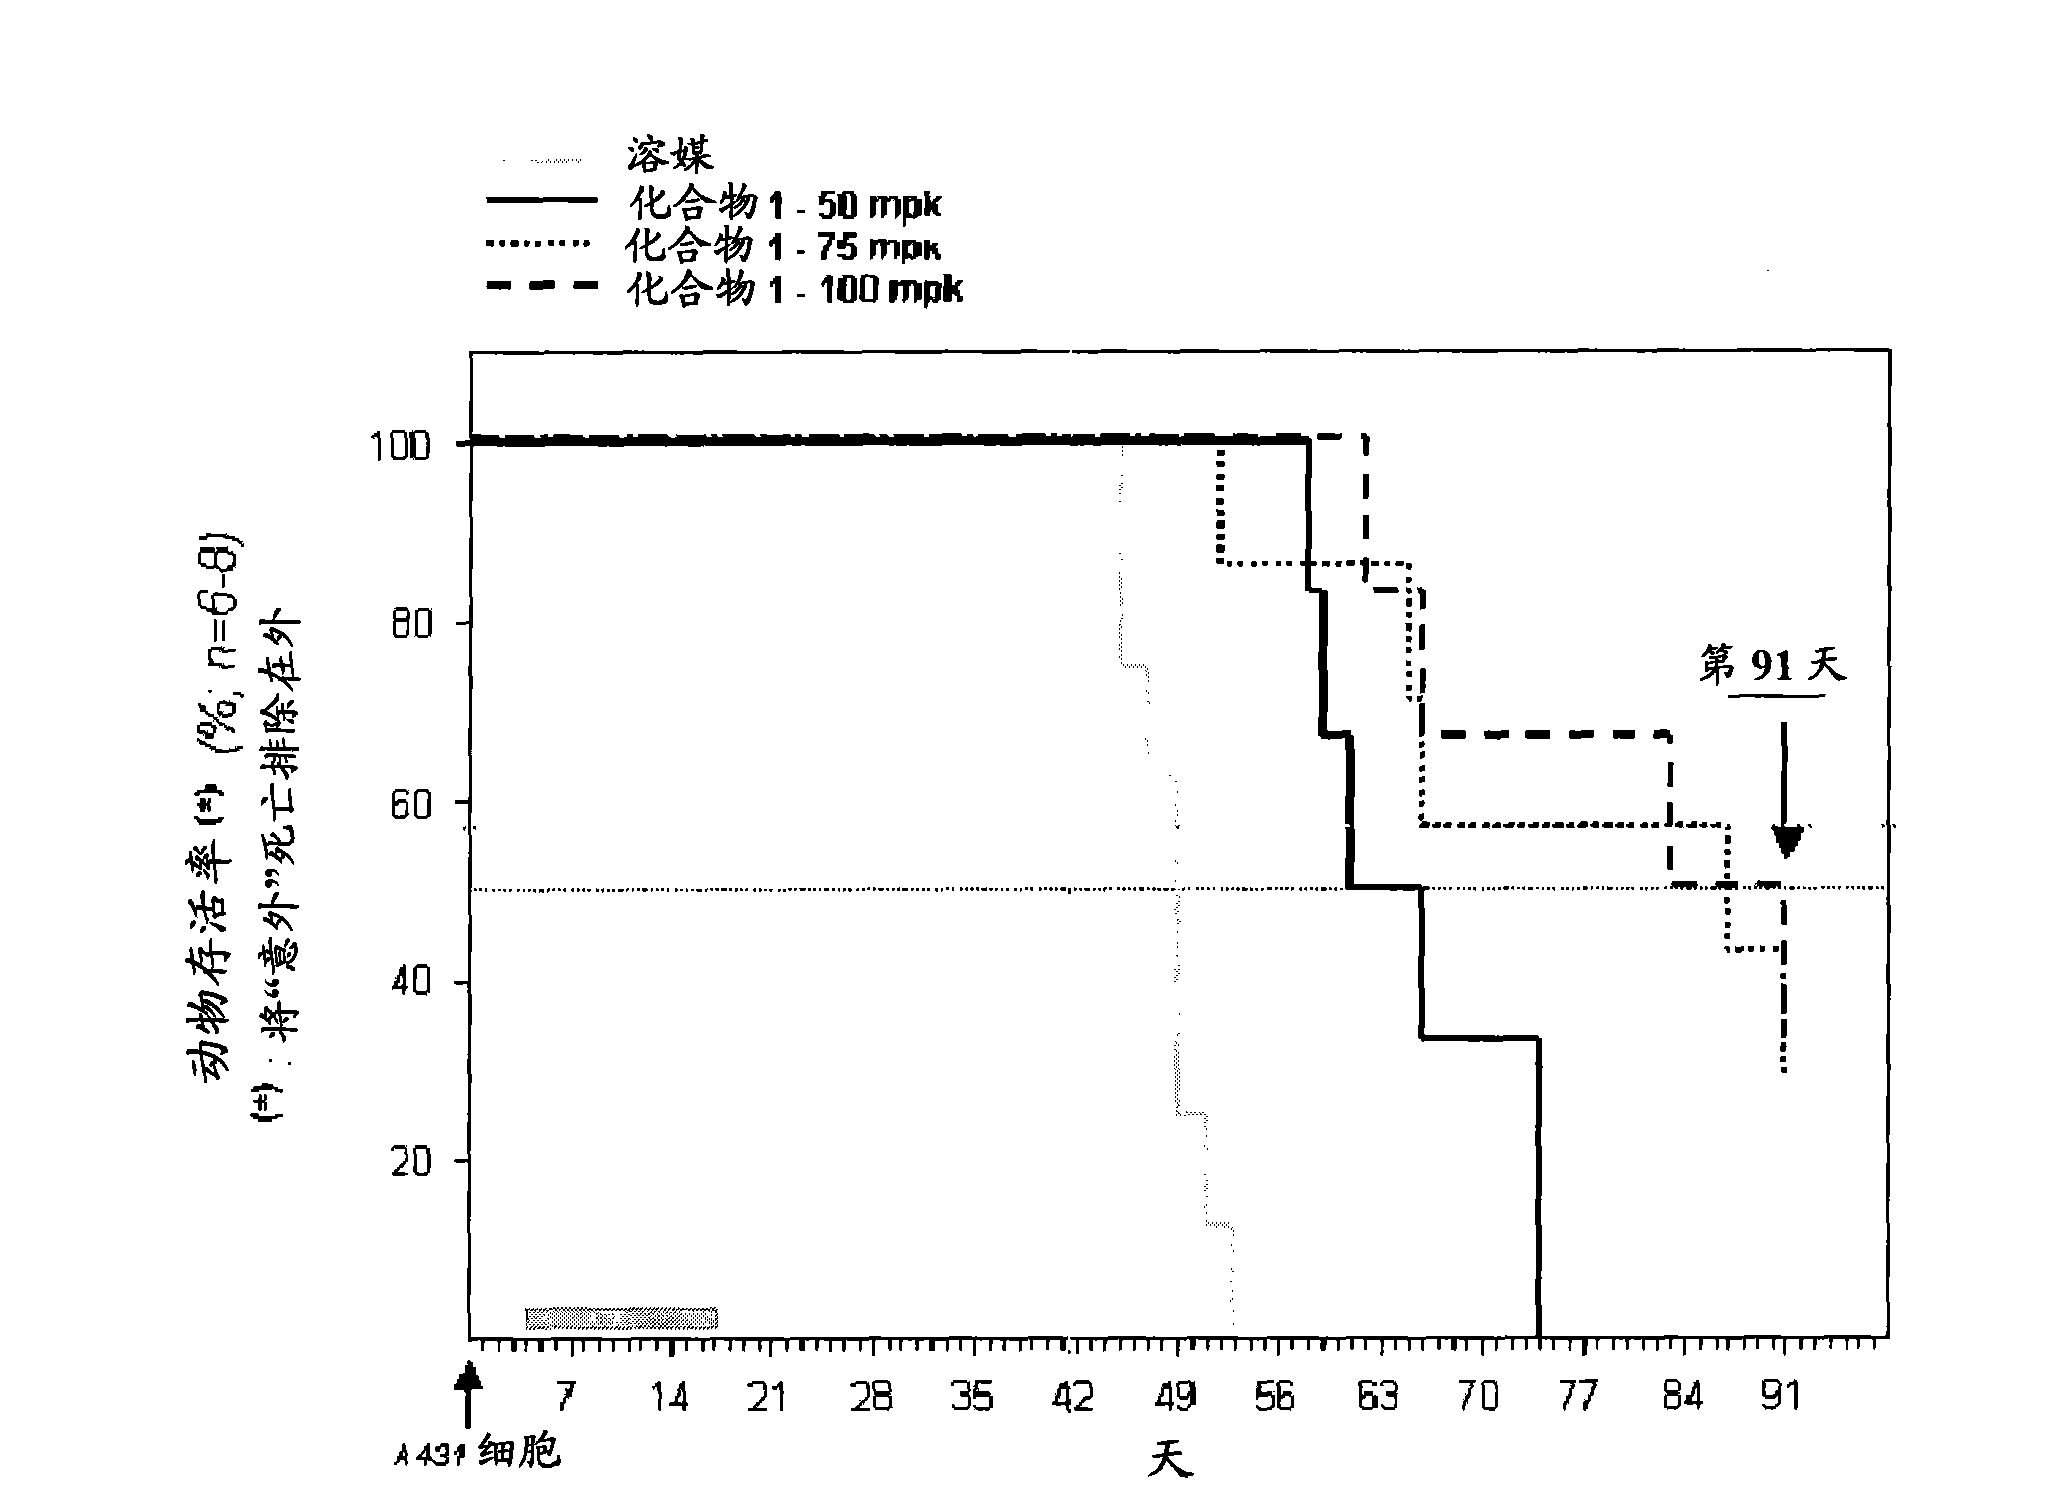 Use of a mt kinase inhibitor for treating or preventing brain cancer